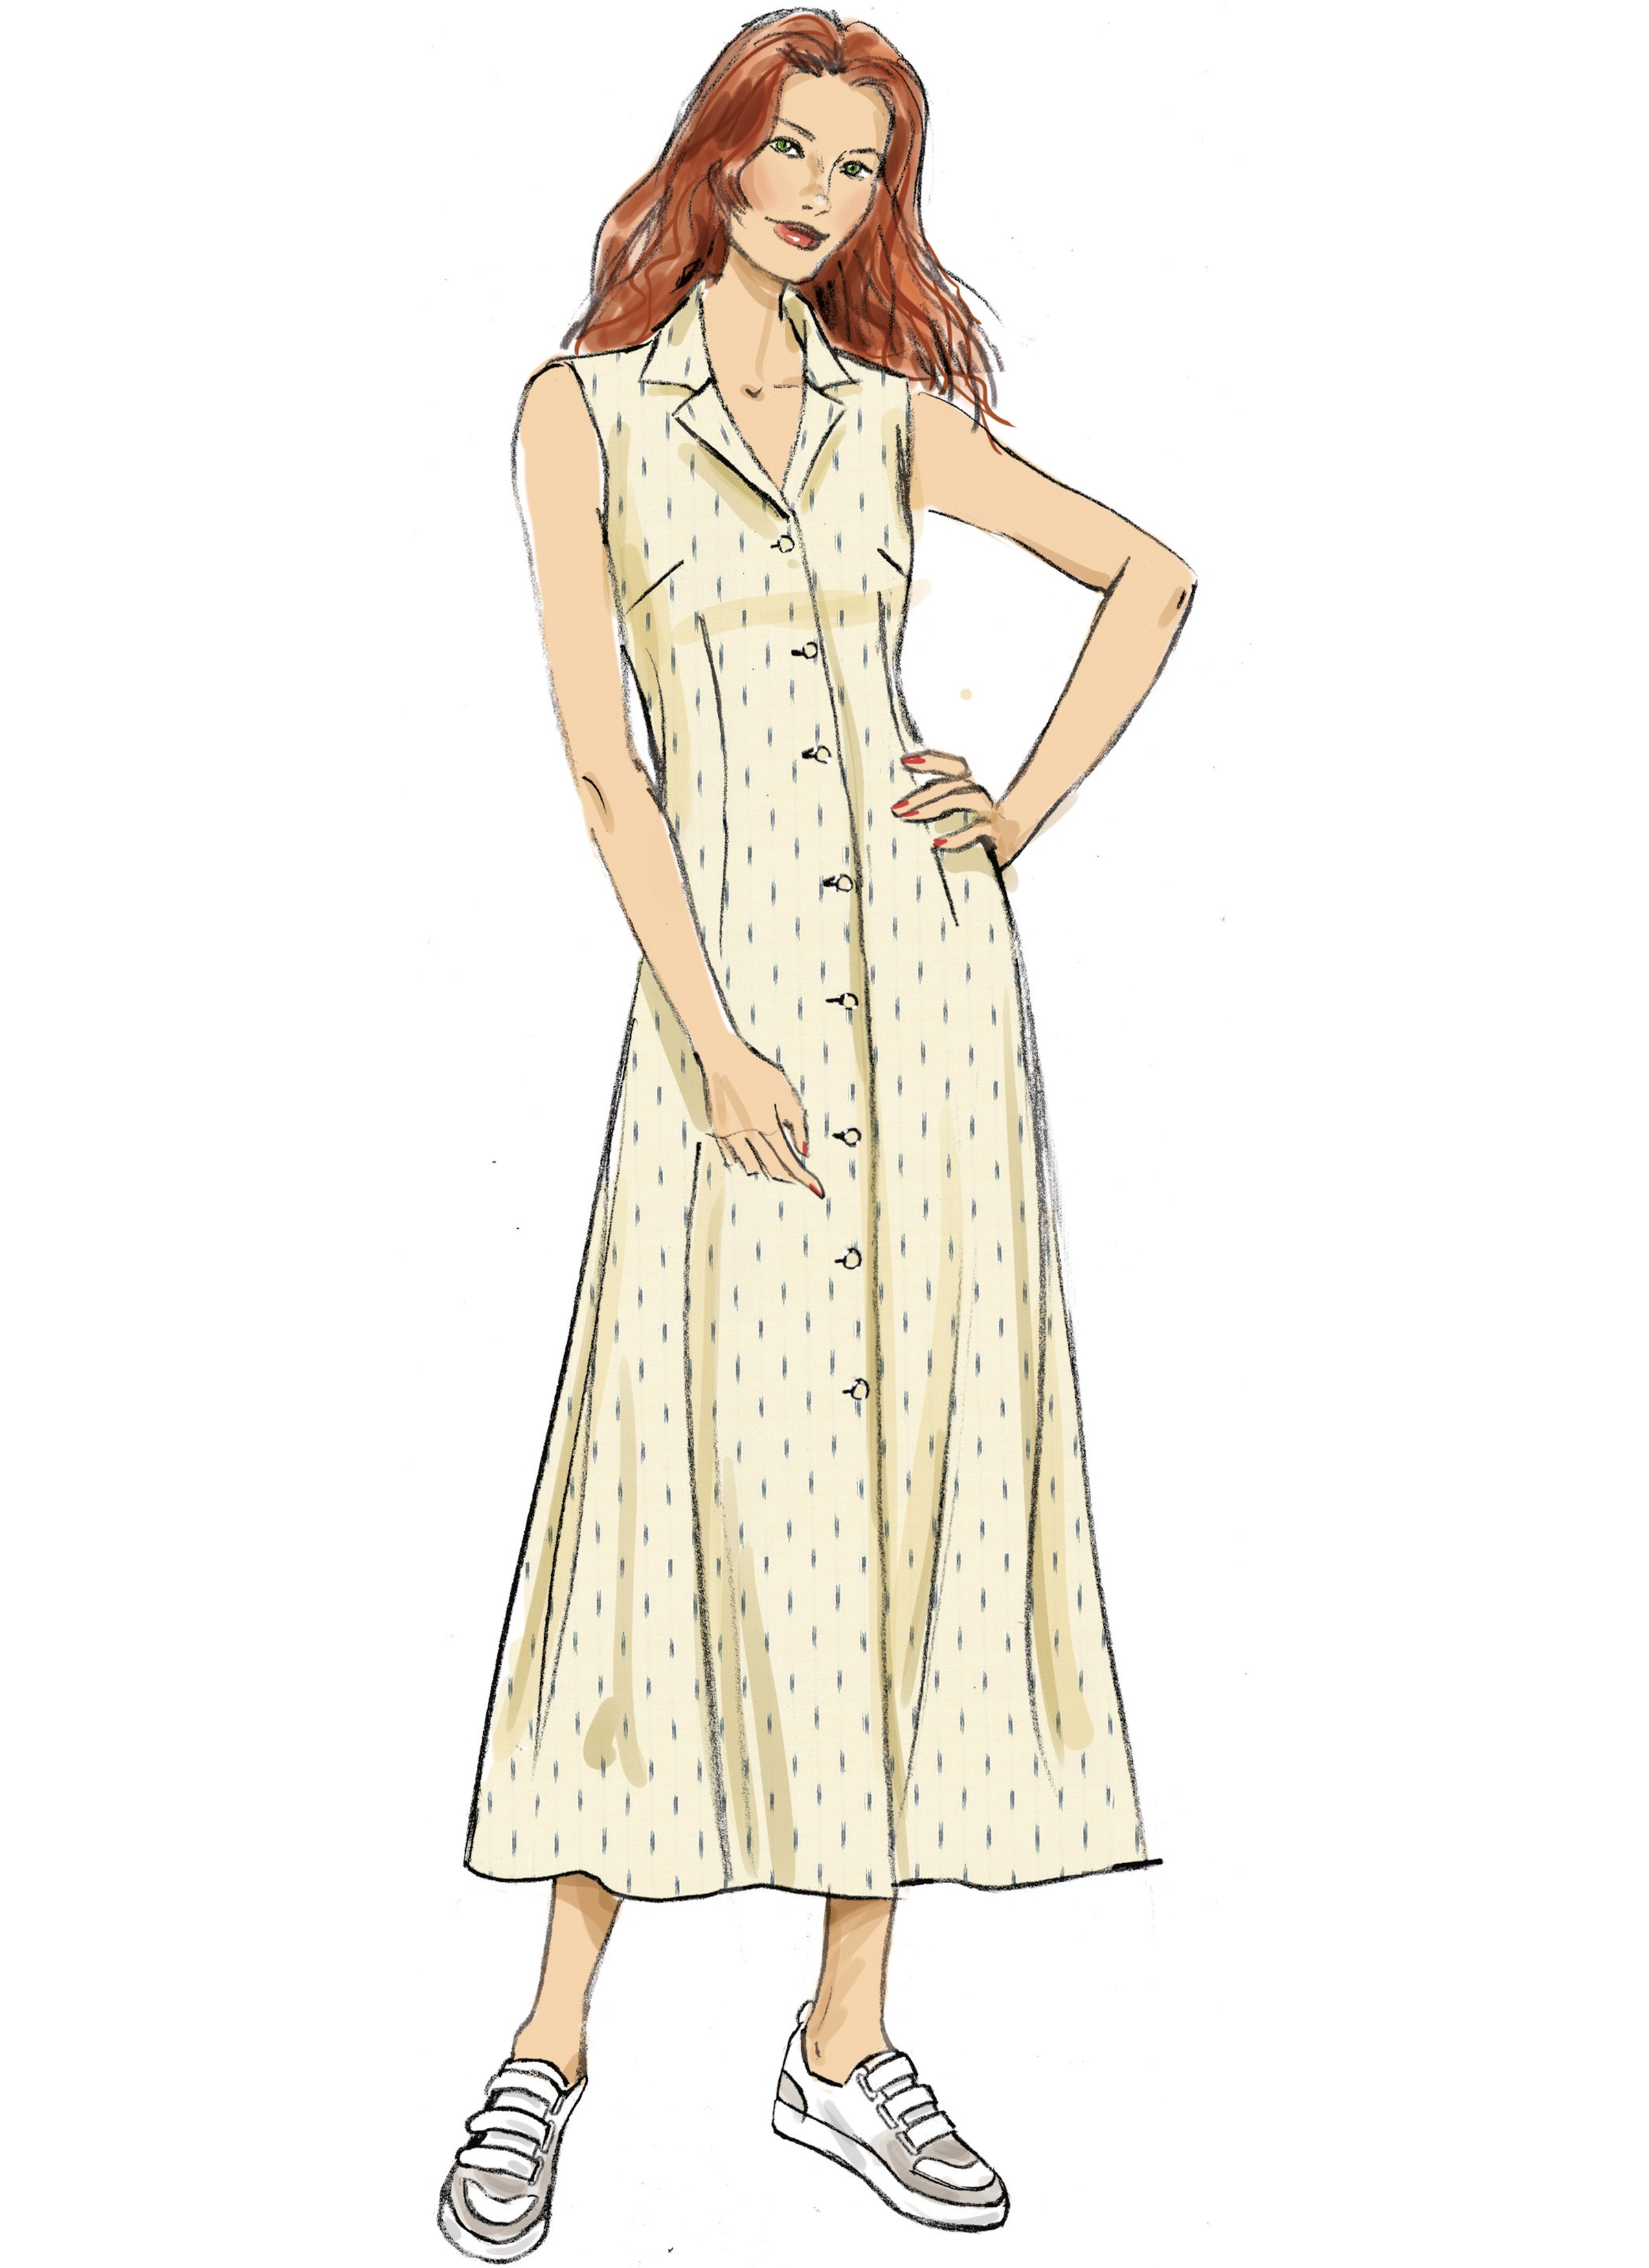 Butterick sewing pattern B6974 Misses' Shirt Dress by Palmer/Pletsch from Jaycotts Sewing Supplies